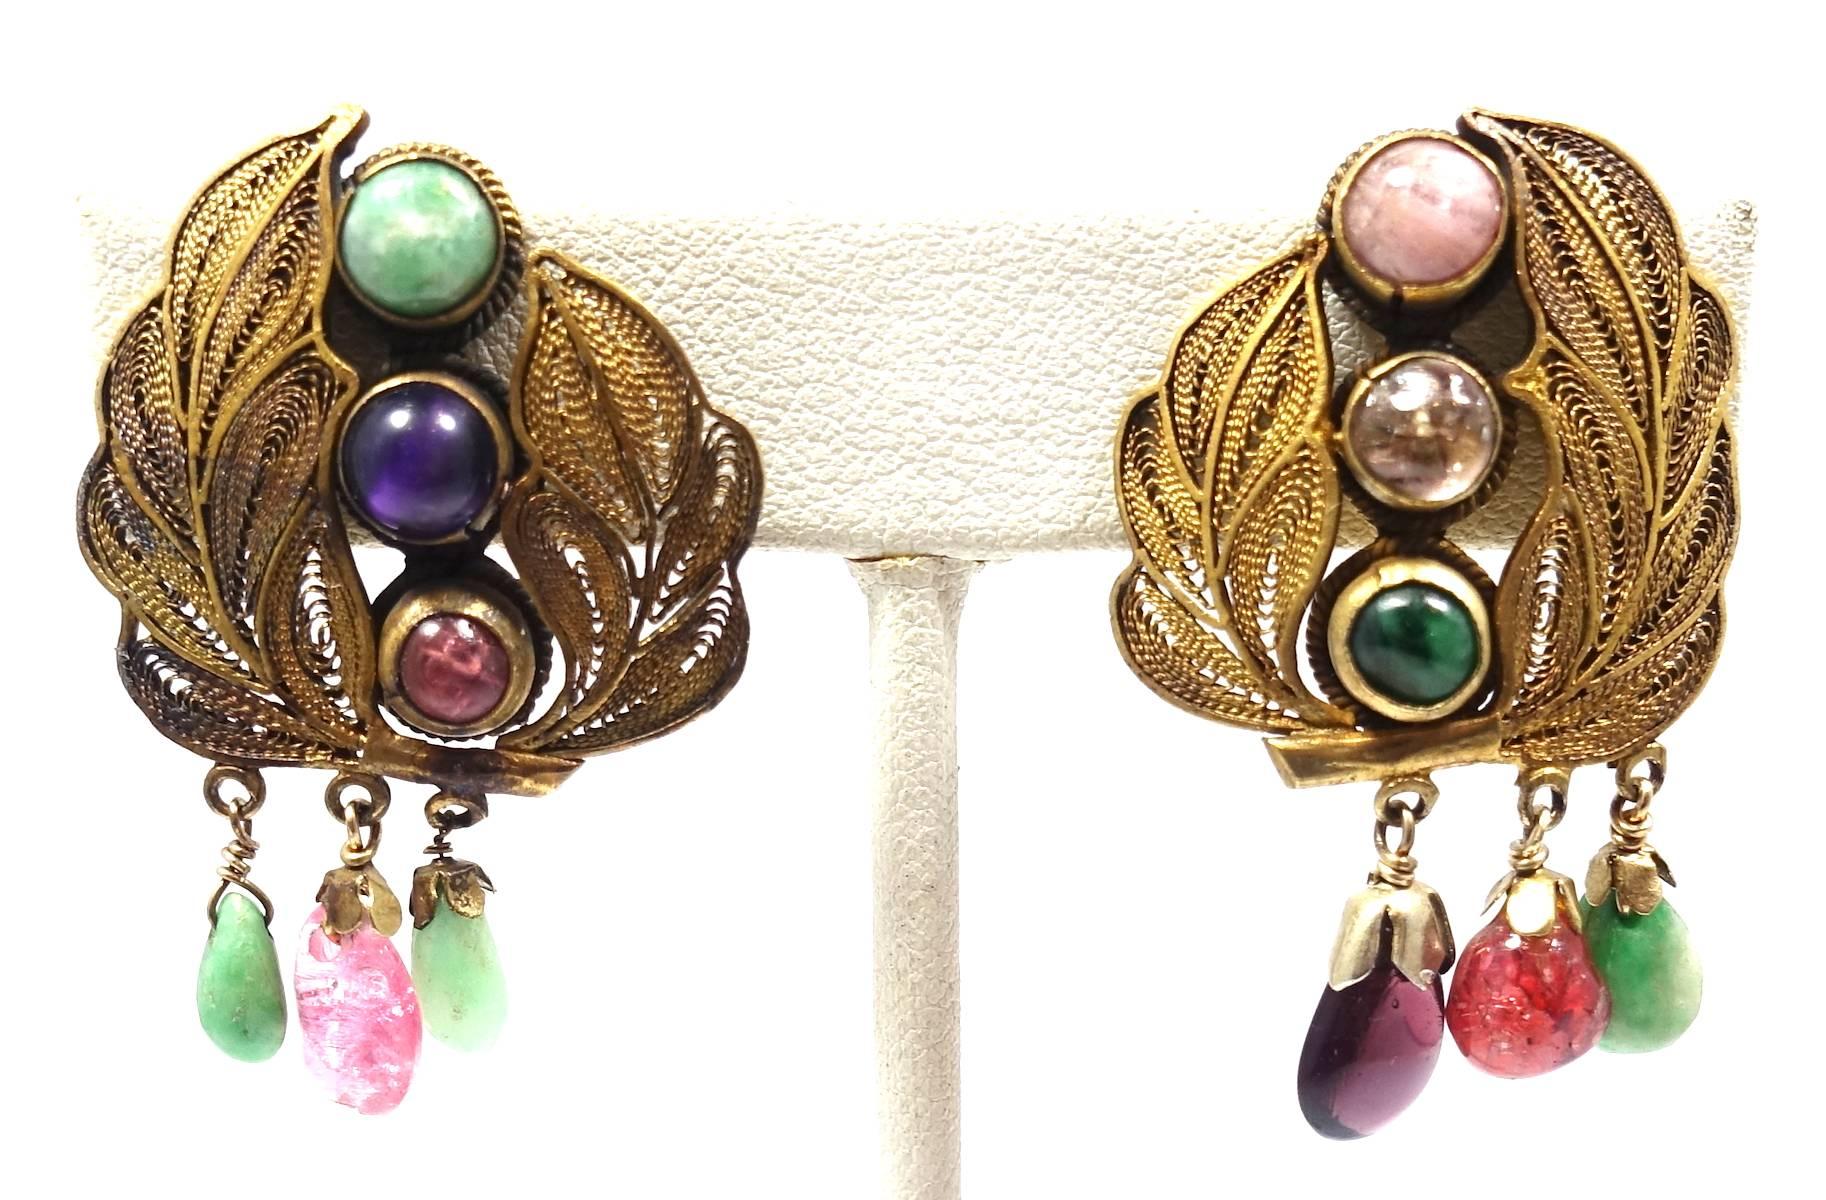 These “Good Luck” all original vintage clip earrings feature multiple genuine gemstones in an open work floral leaf design in sterling silver with a gold vermeil. These clip earrings measure 1-1/2” x 1” and are in excellent condition.